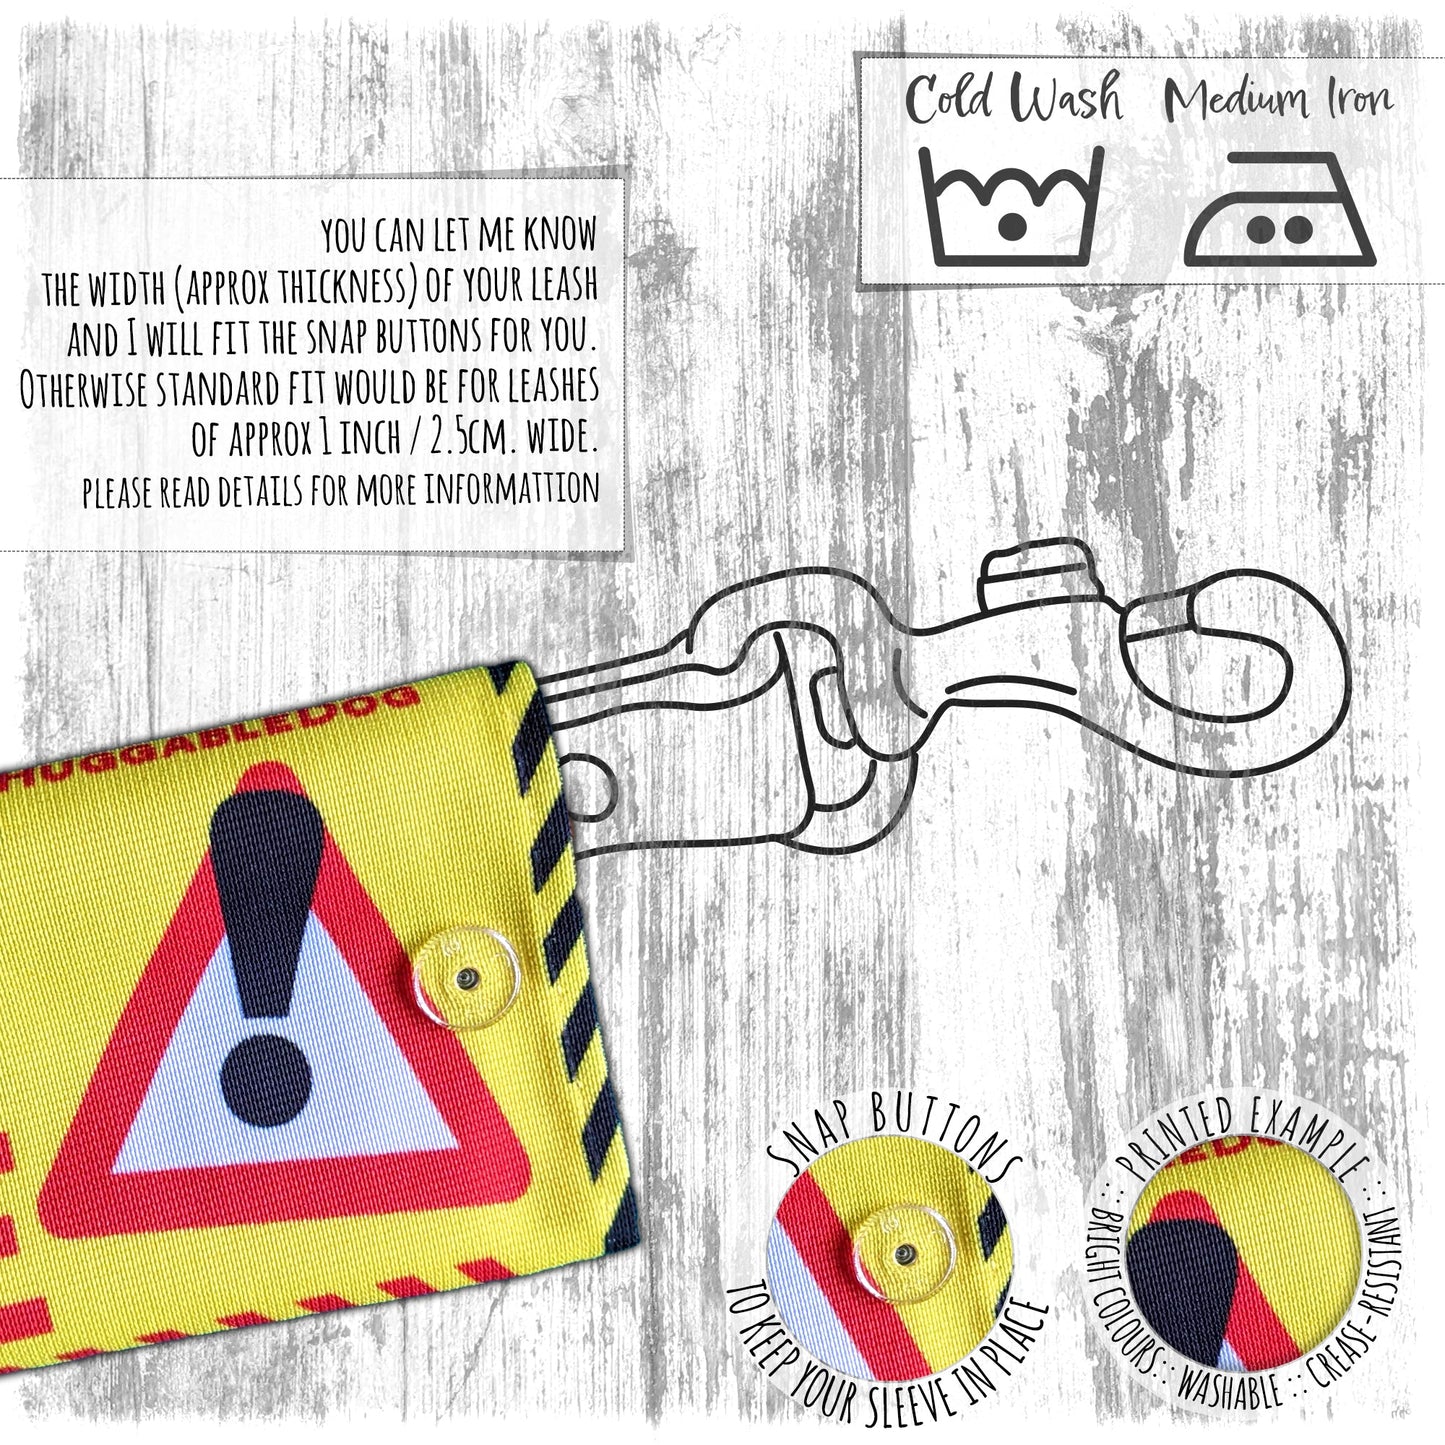 "IN TRAINING, please IGNORE", do not pet. Warning covers for dogs leashes. Dog training Leash sleeves.